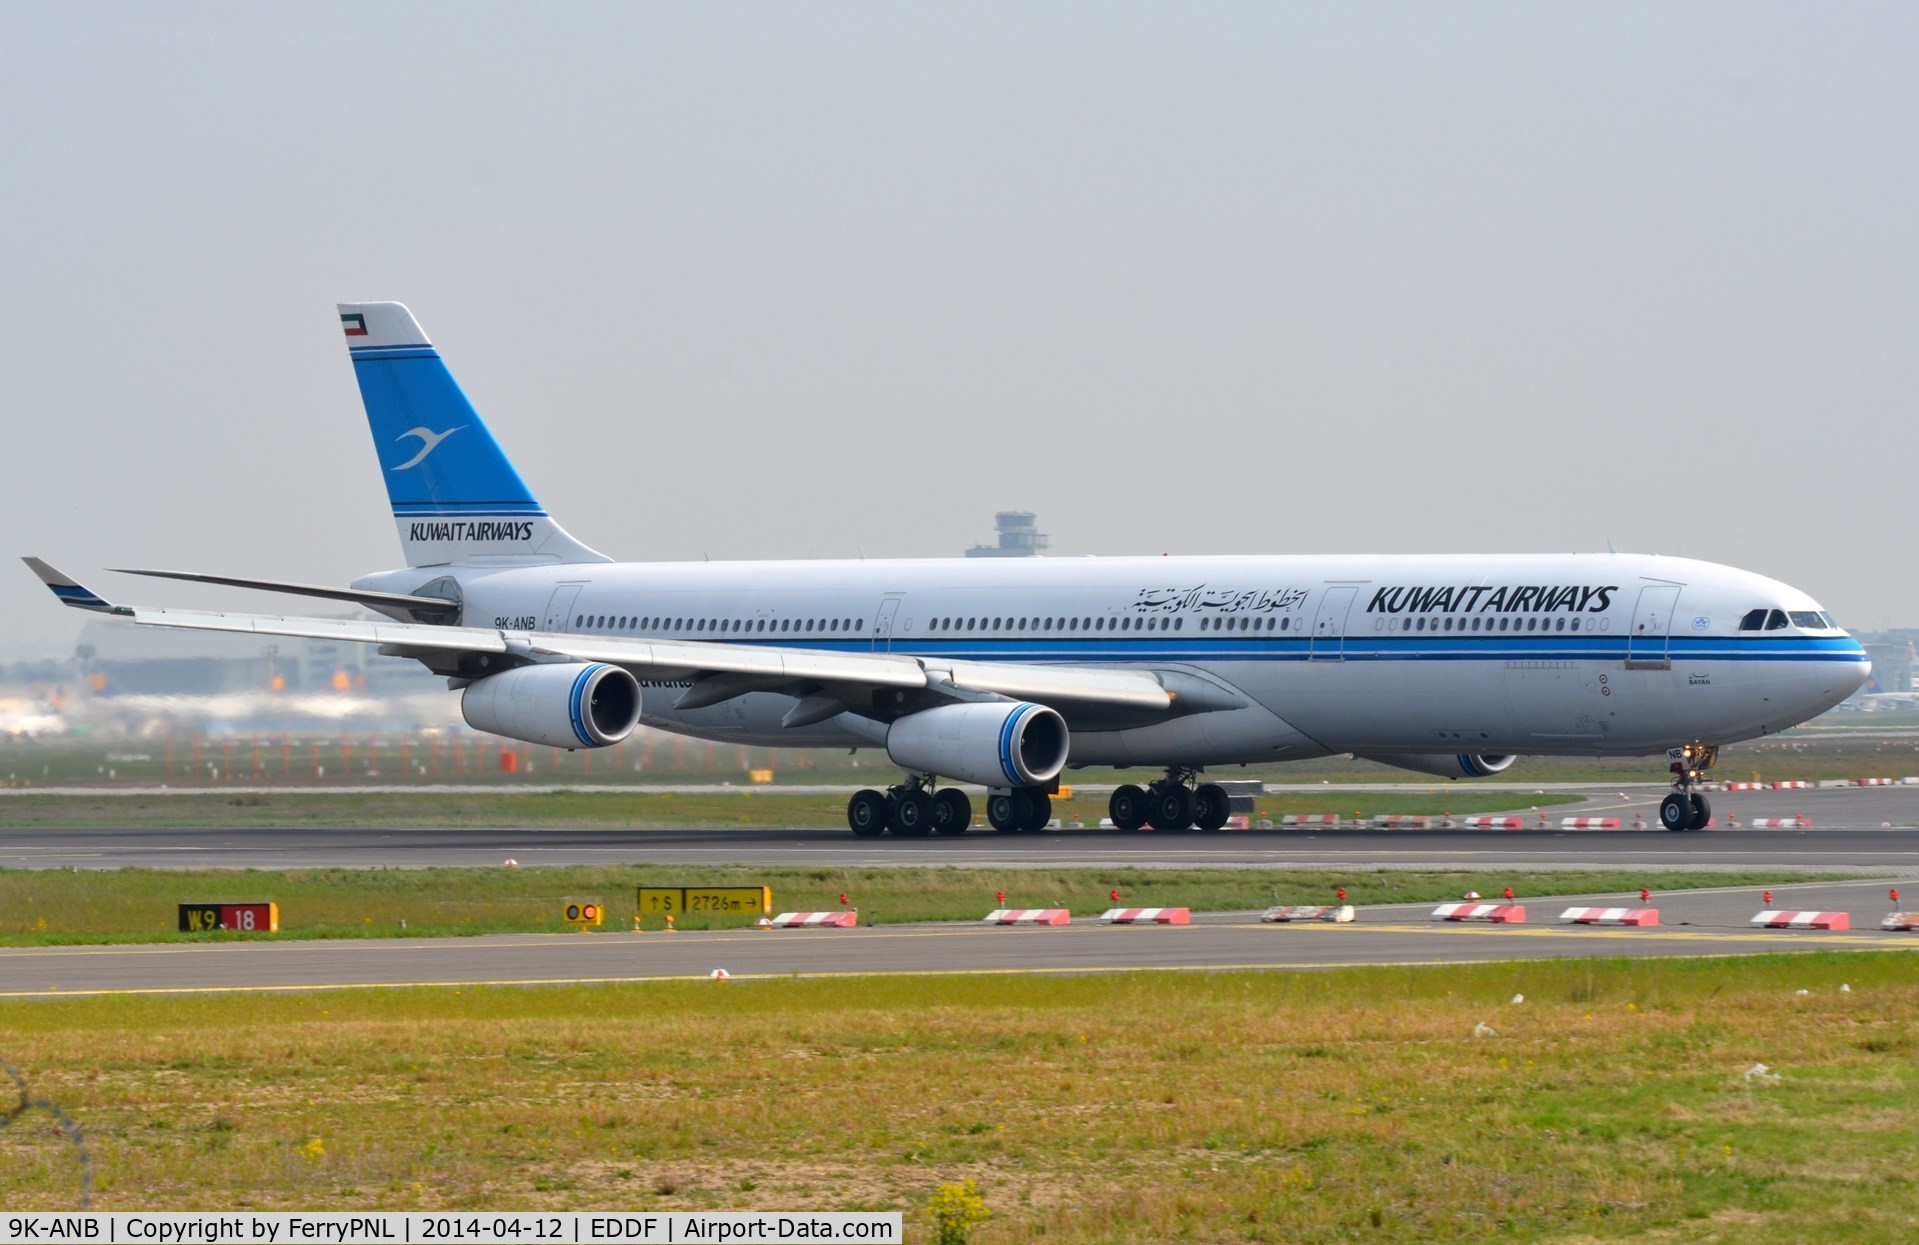 9K-ANB, 1995 Airbus A340-313 C/N 090, Kuwait A343 during its take-off run.